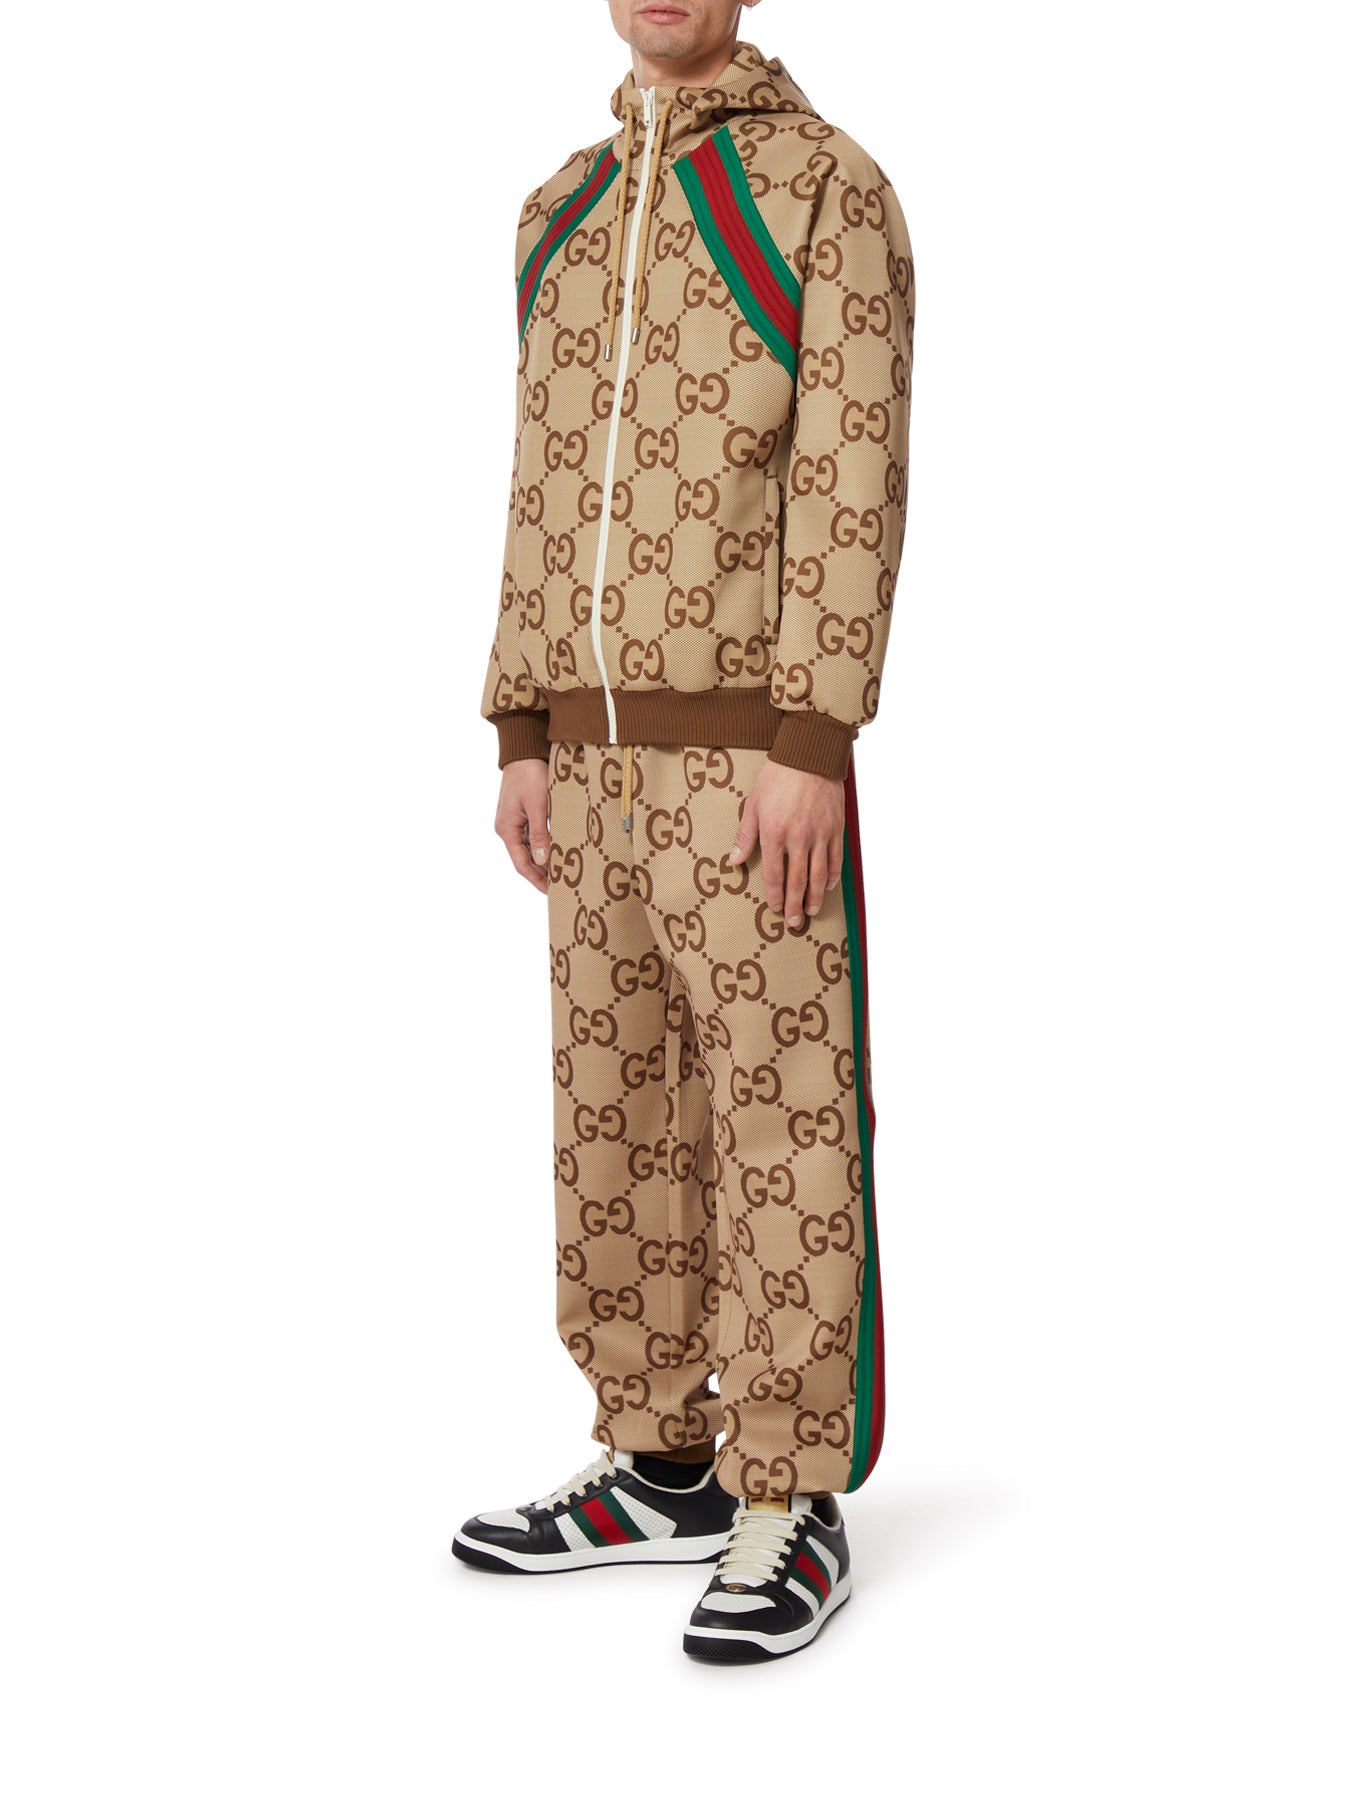 Jumbo GG jogging pant with Web in beige and ebony